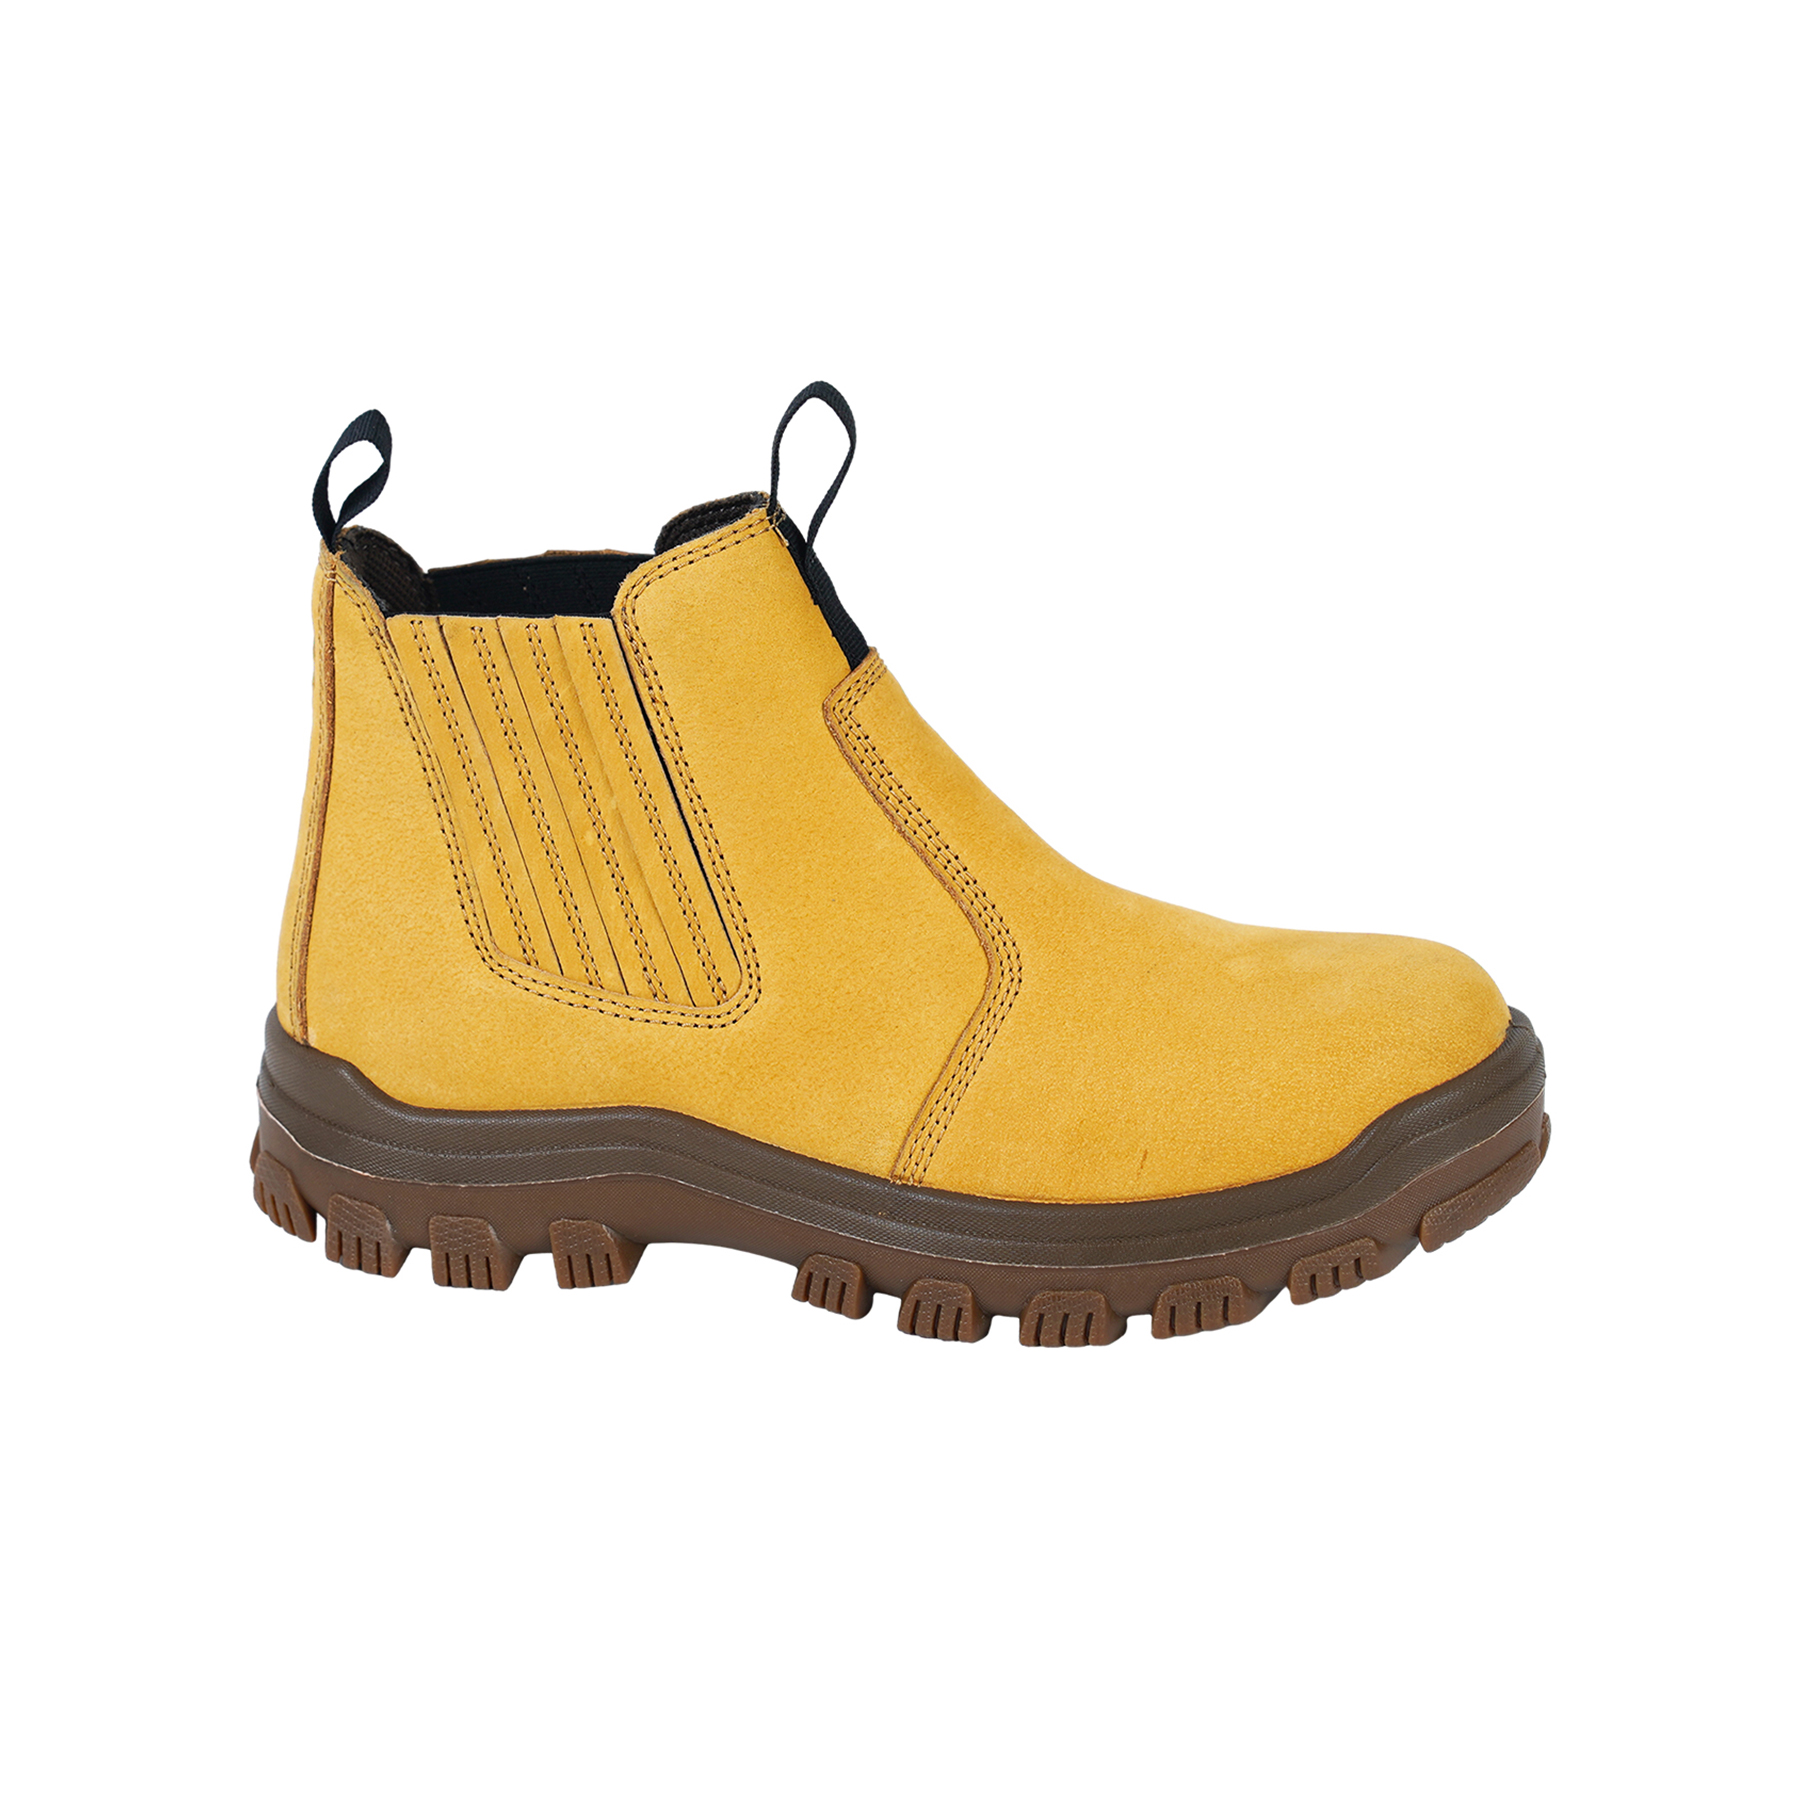 Steel toe boots for work, Whale Chelsea--Wheat, best fashion safety boots.